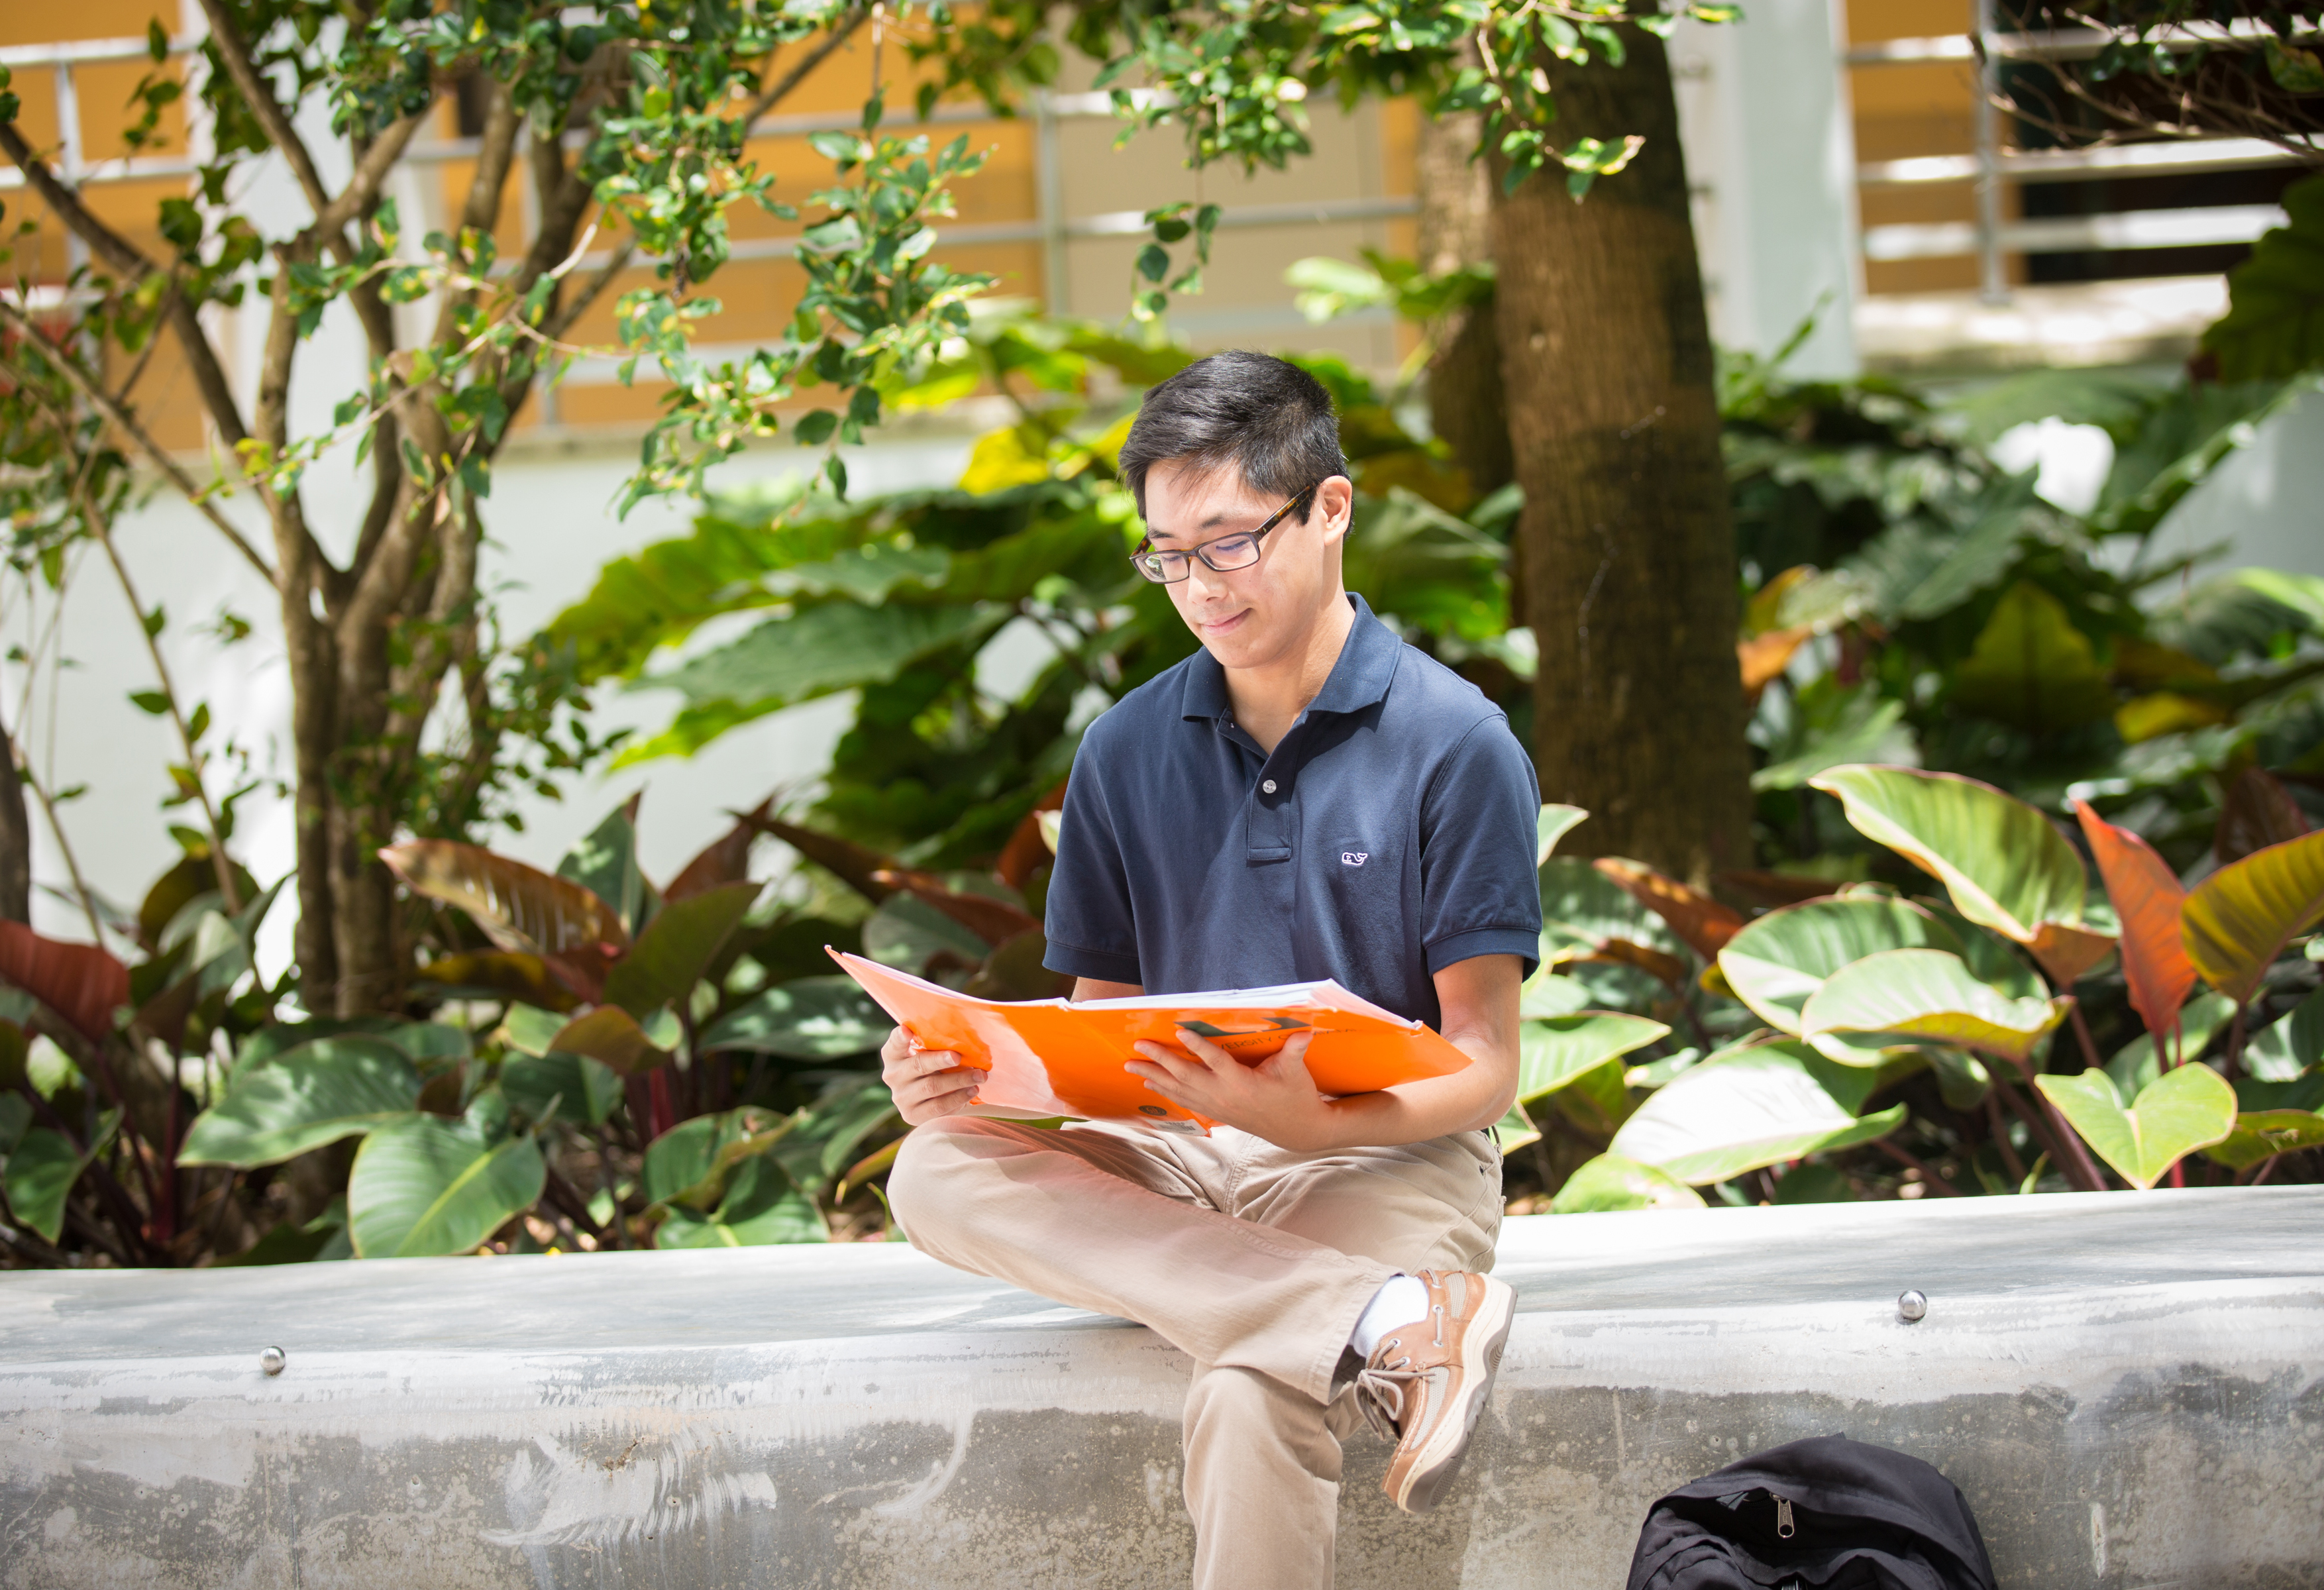  Student sitting and reading outdoors.